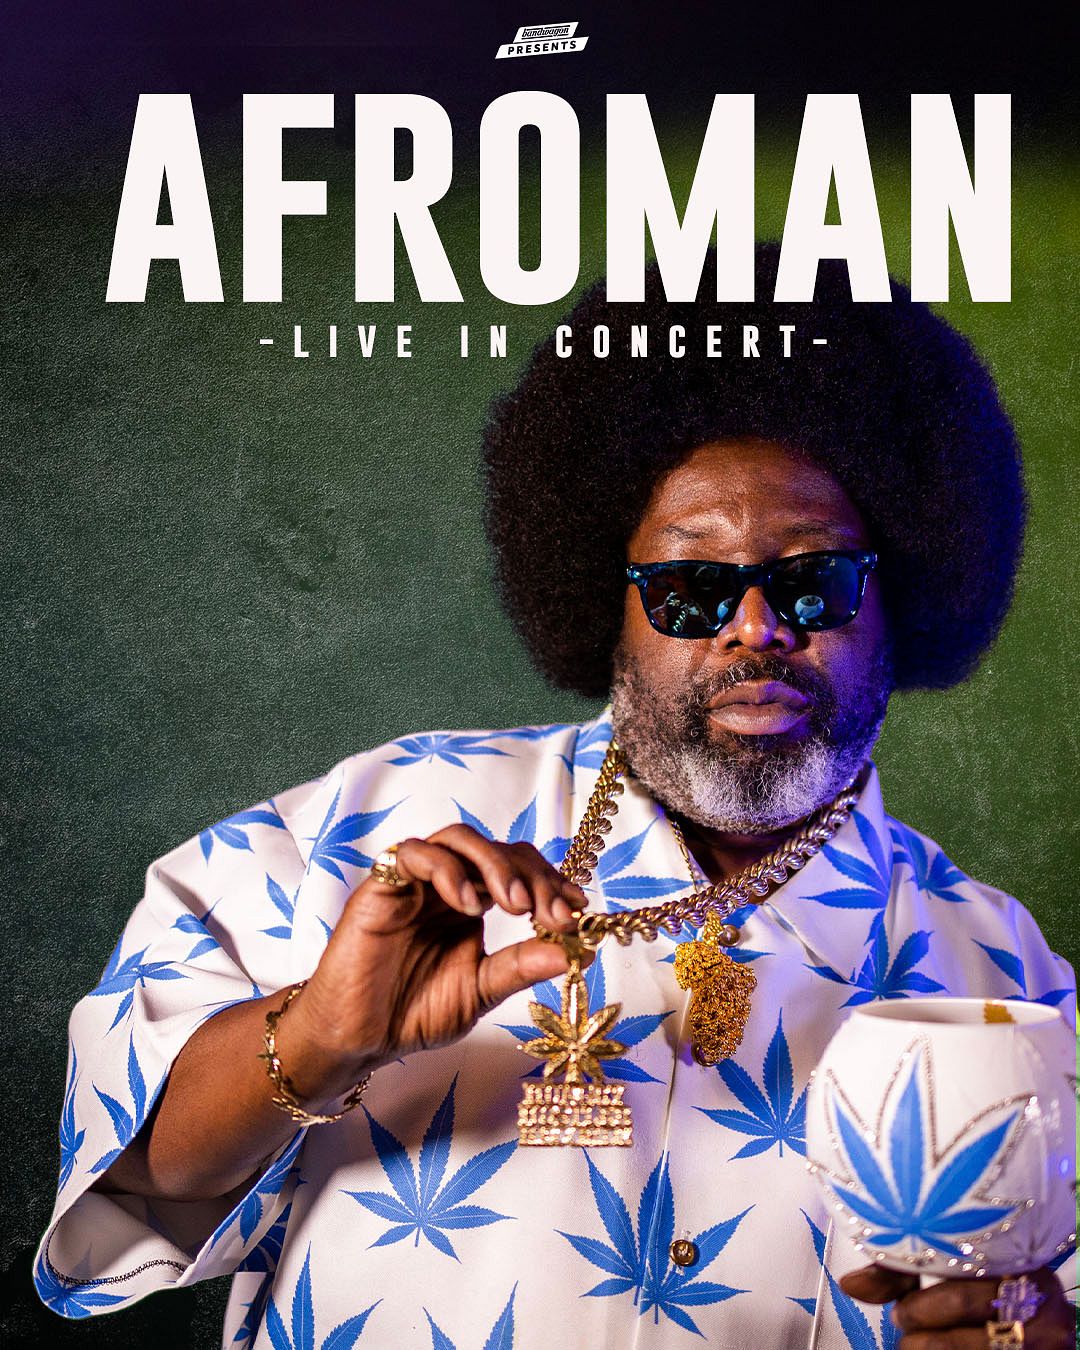 Afroman Live in Concert (Denver, CO) Tickets at The Black Buzzard at